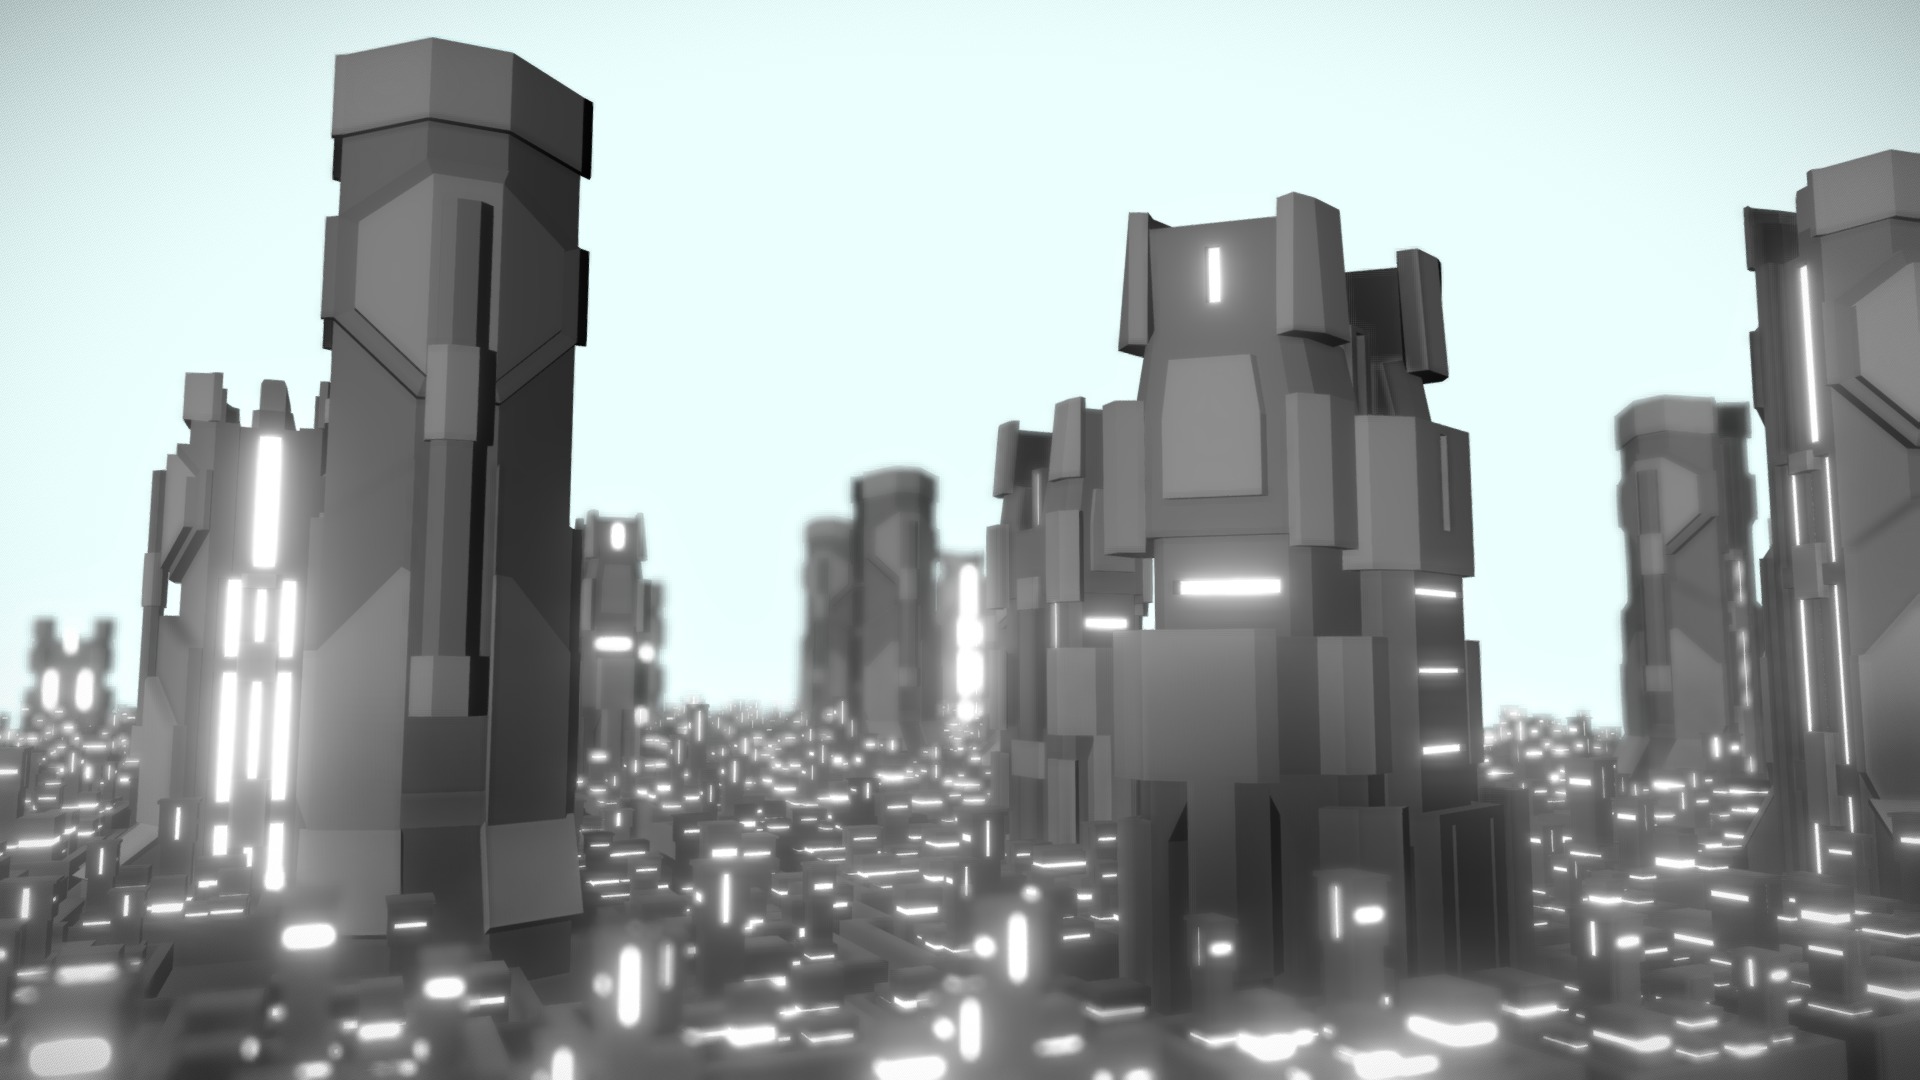 3D model Scifi cityscape - This is a 3D model of the Scifi cityscape. The 3D model is about a city skyline at night.